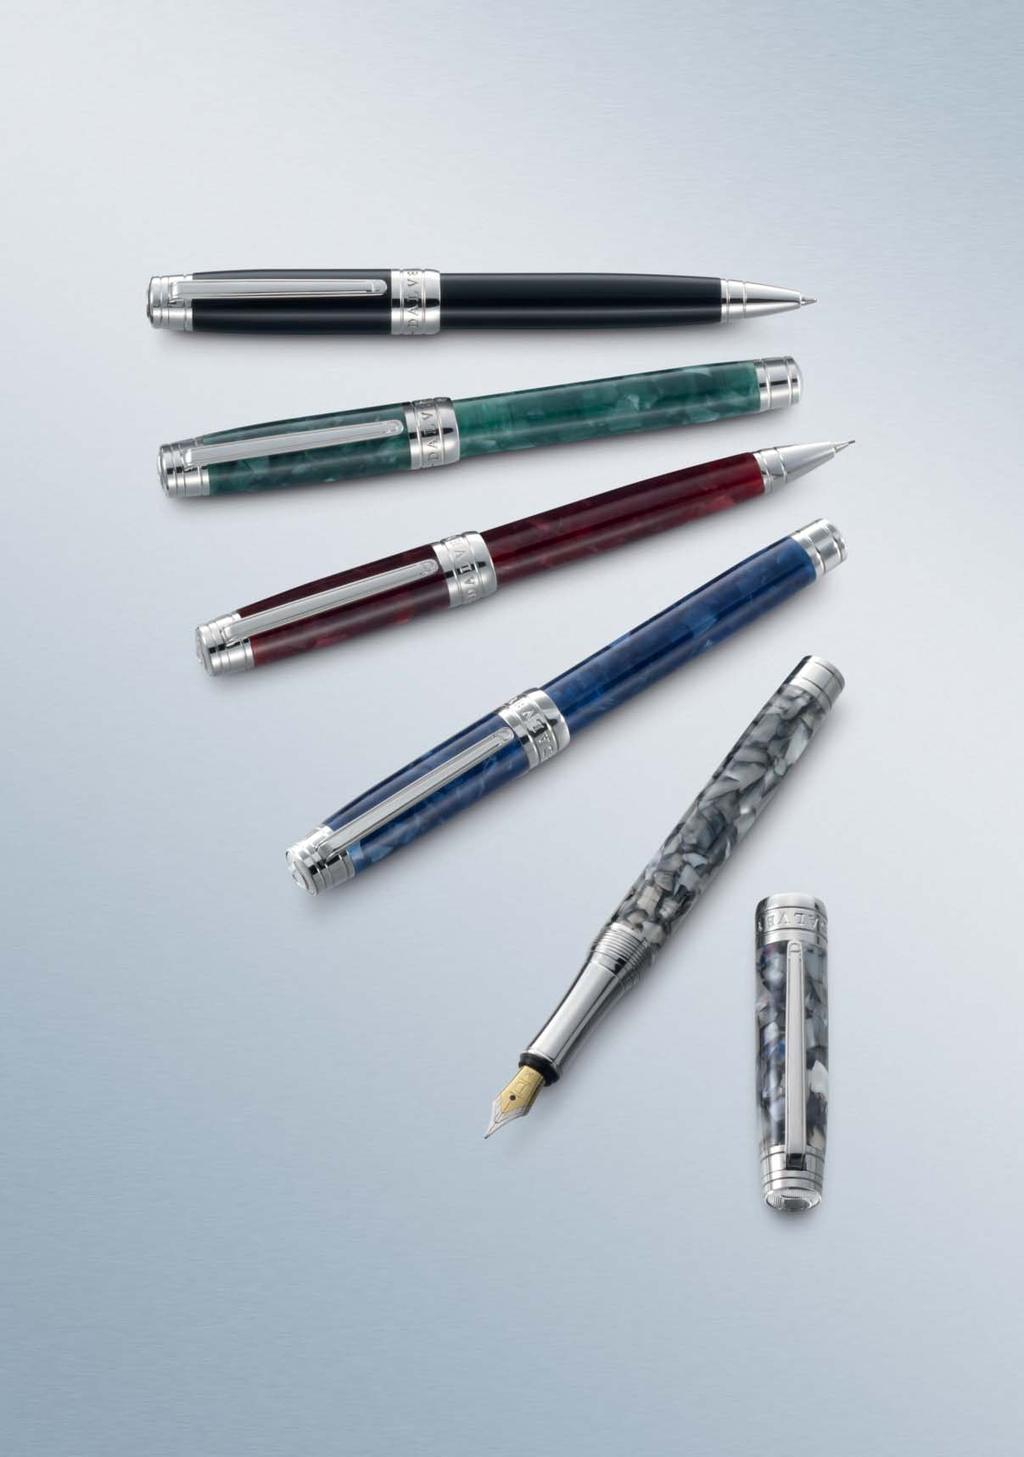 BALLPOINT PEN ROLLERBALL PEN PENCIL FOUNTAIN PEN Unique precious resins, rhodium-platinum and gold-plating, and the finest, most hard-wearing nib constructions in iridium, tungsten-carbide and